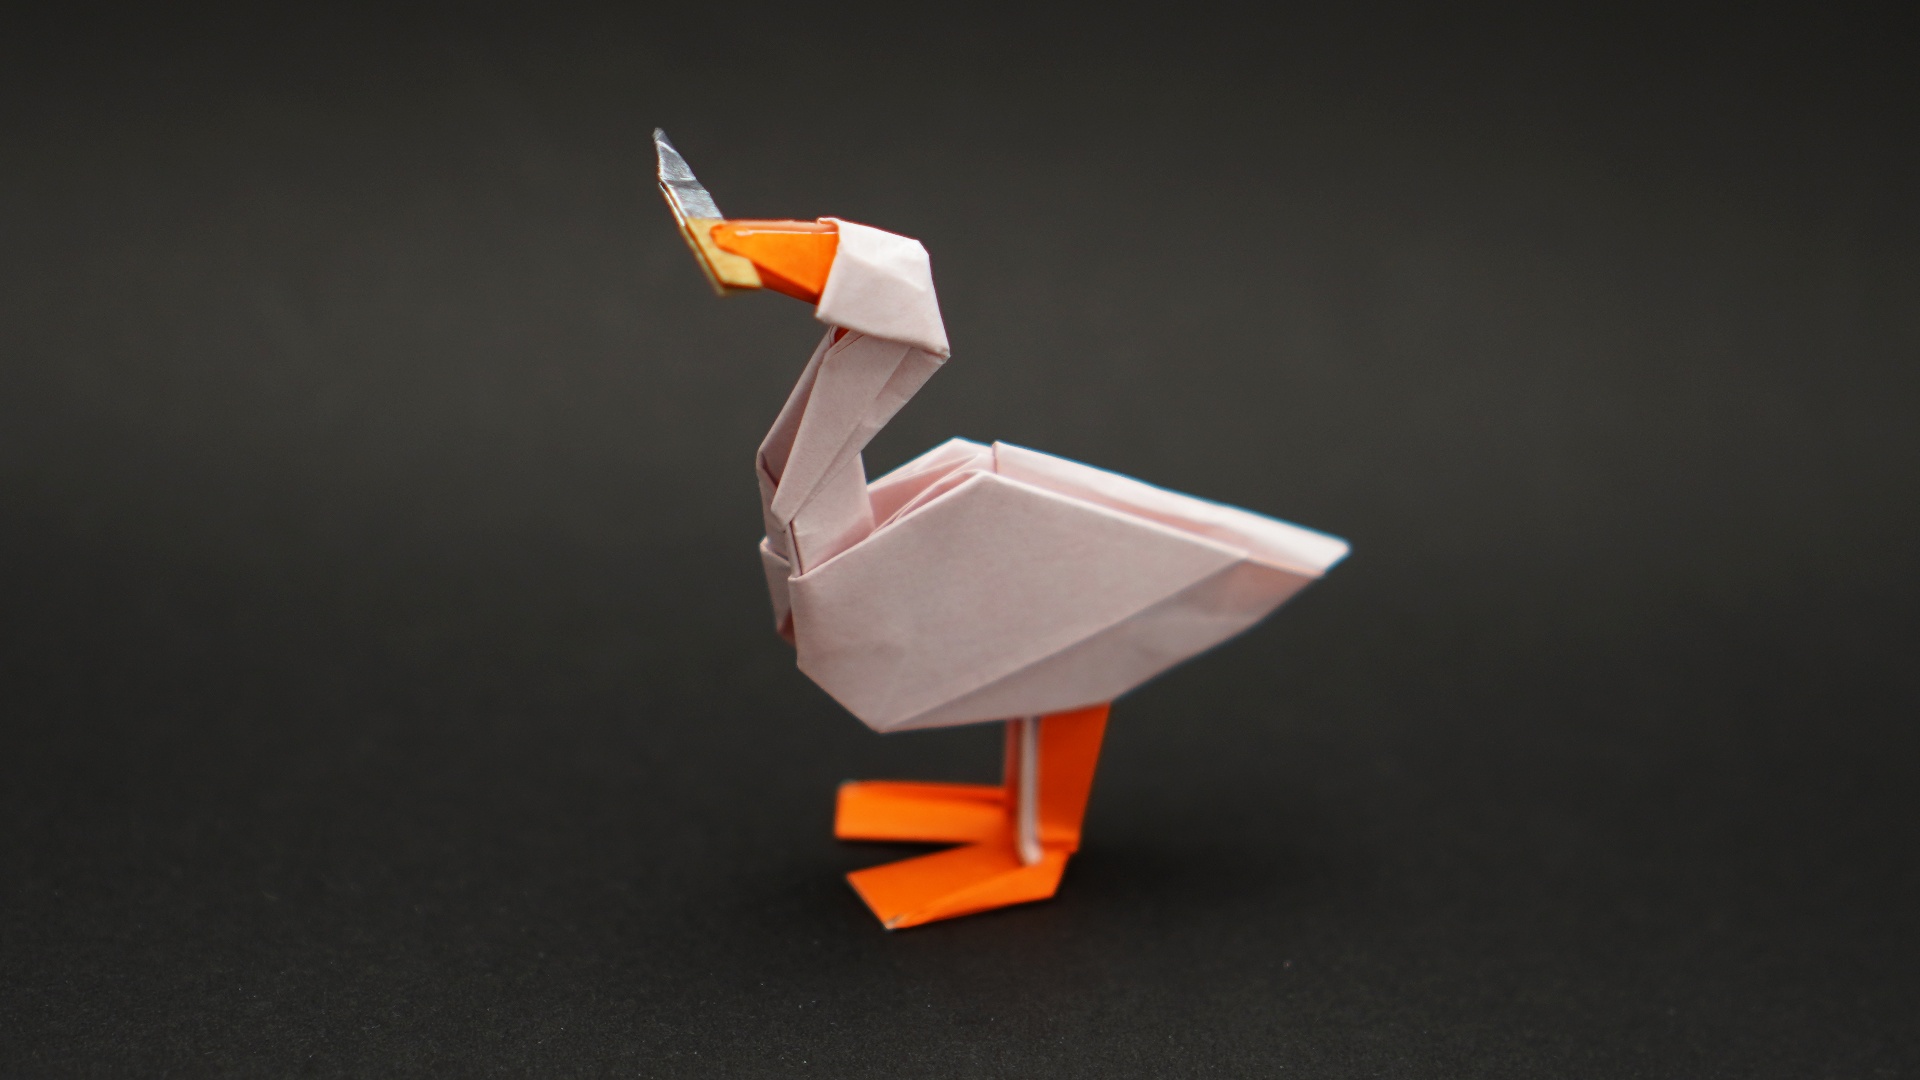 How To Make Easy Paper Duck - Origami Duck Tutorial 